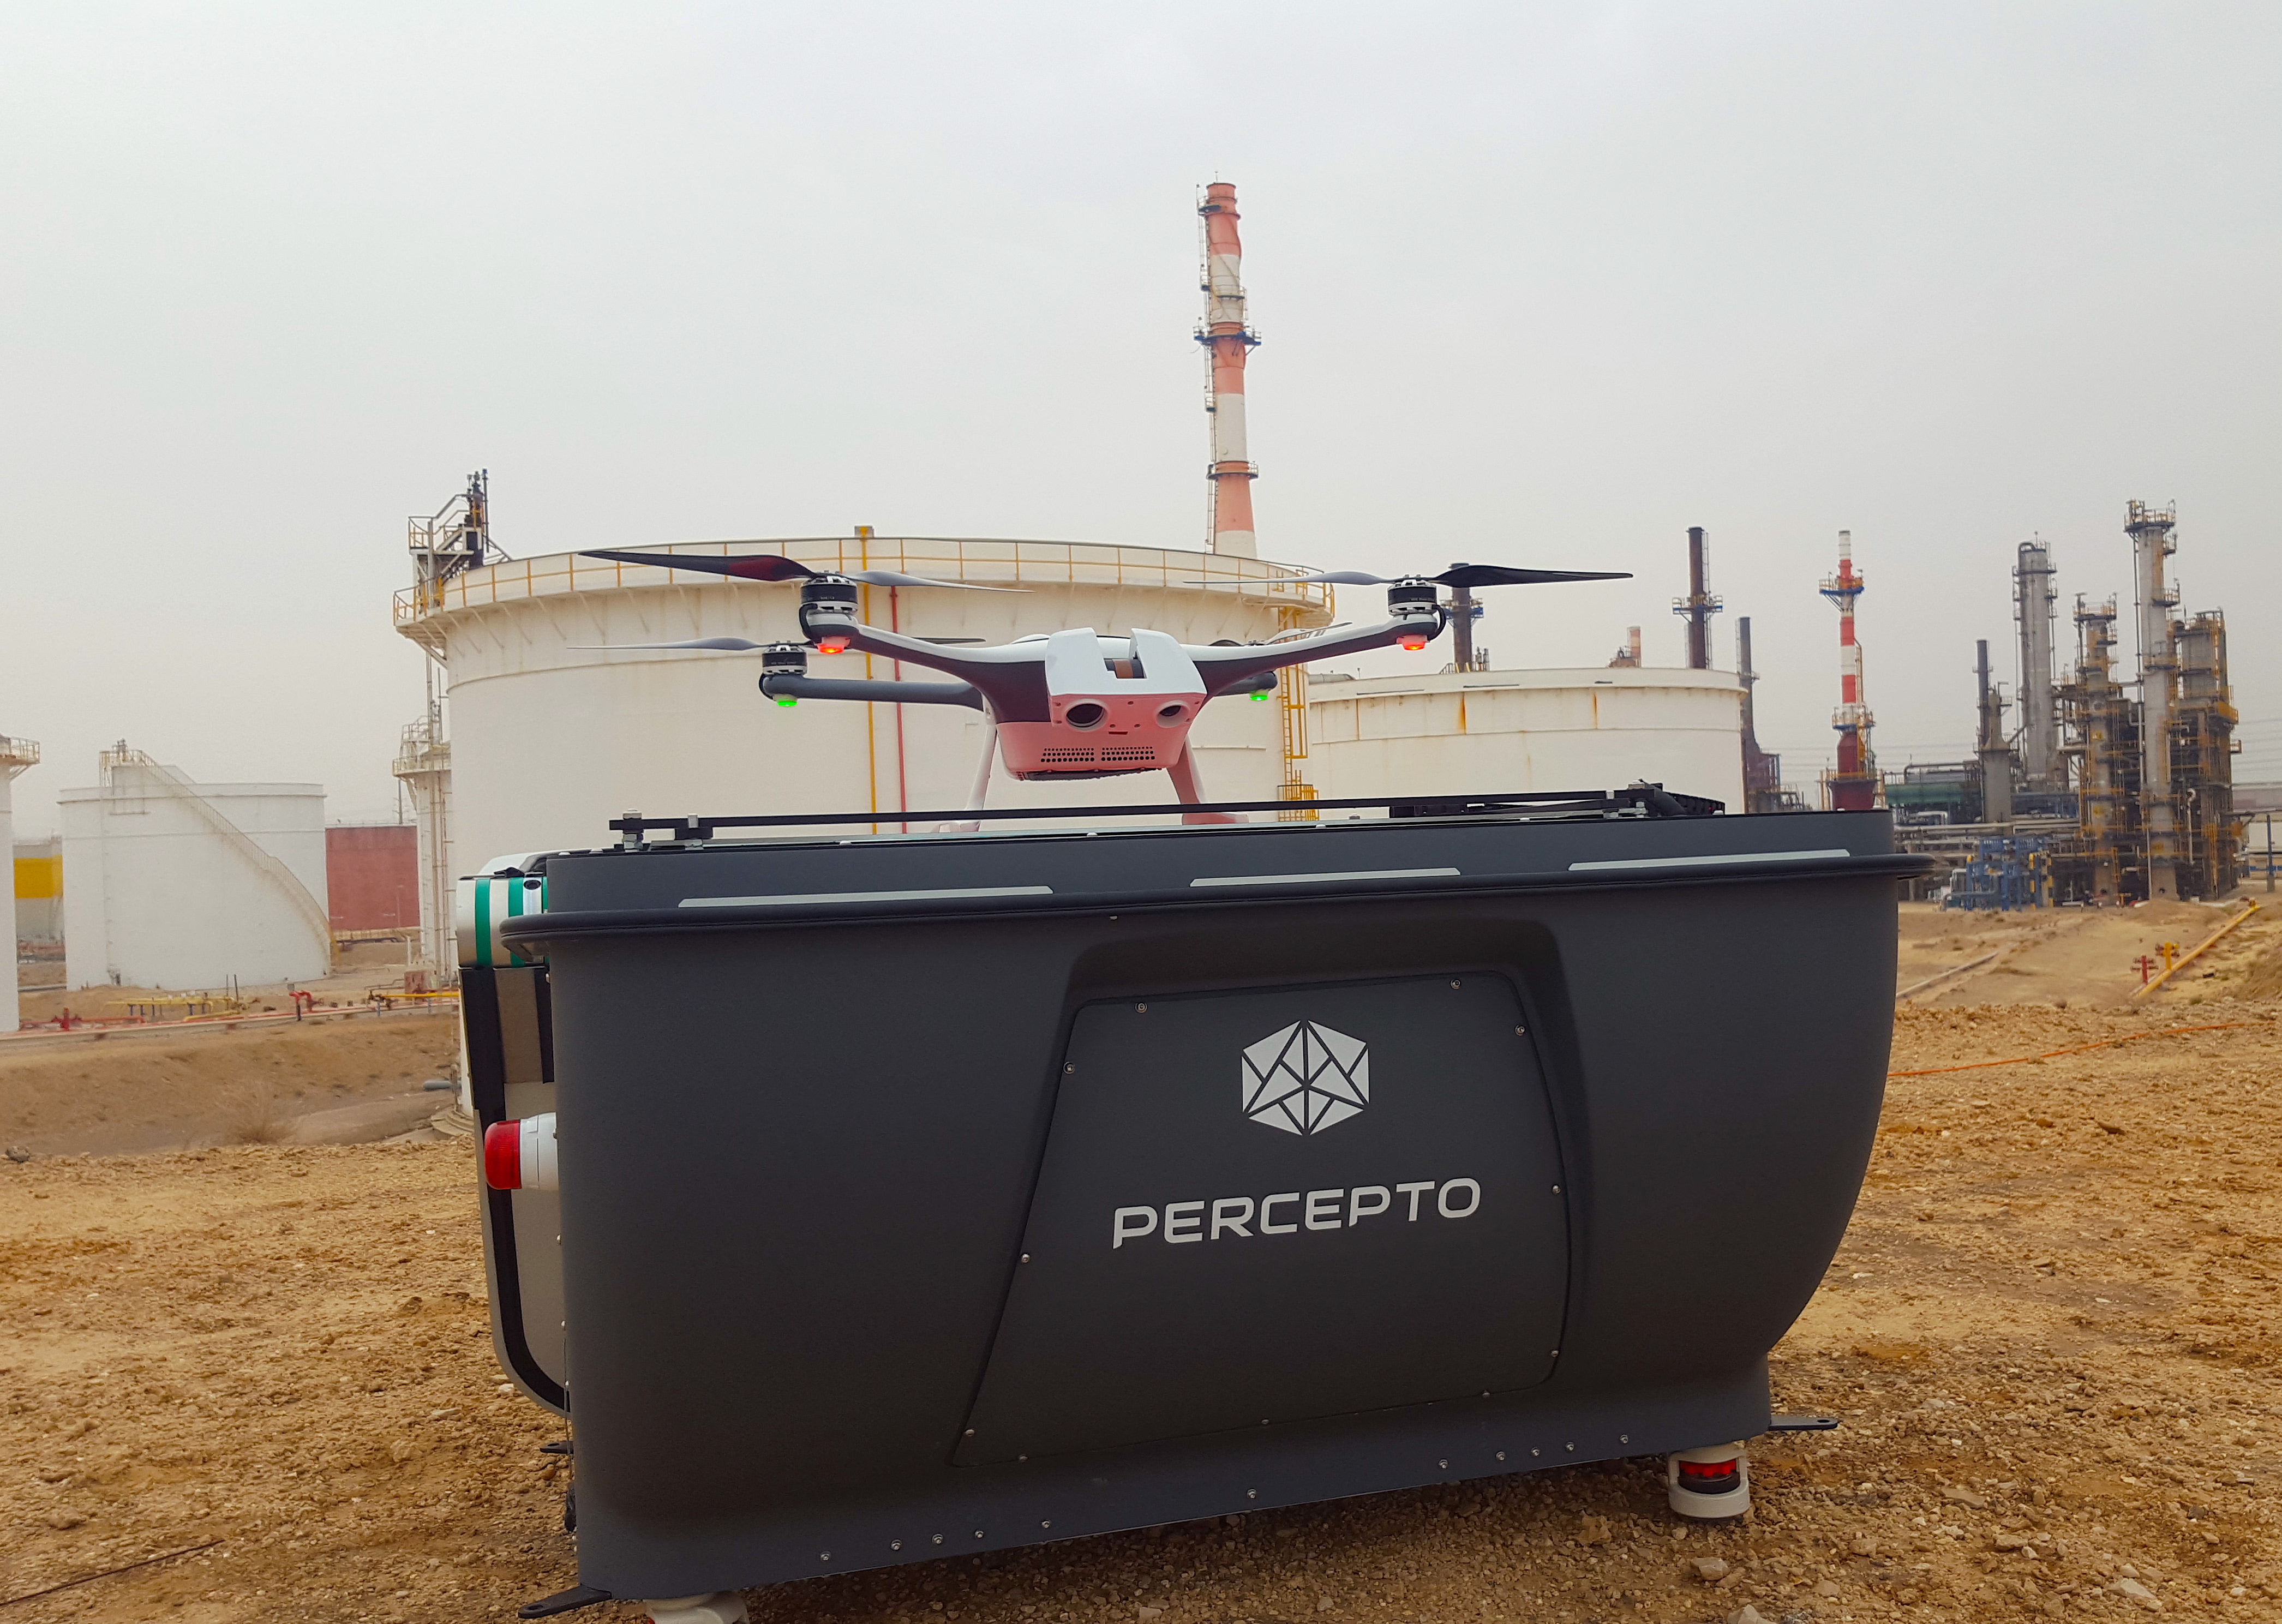 Percepto Approved to deploy automated drones for monitoring Canadian power stations 